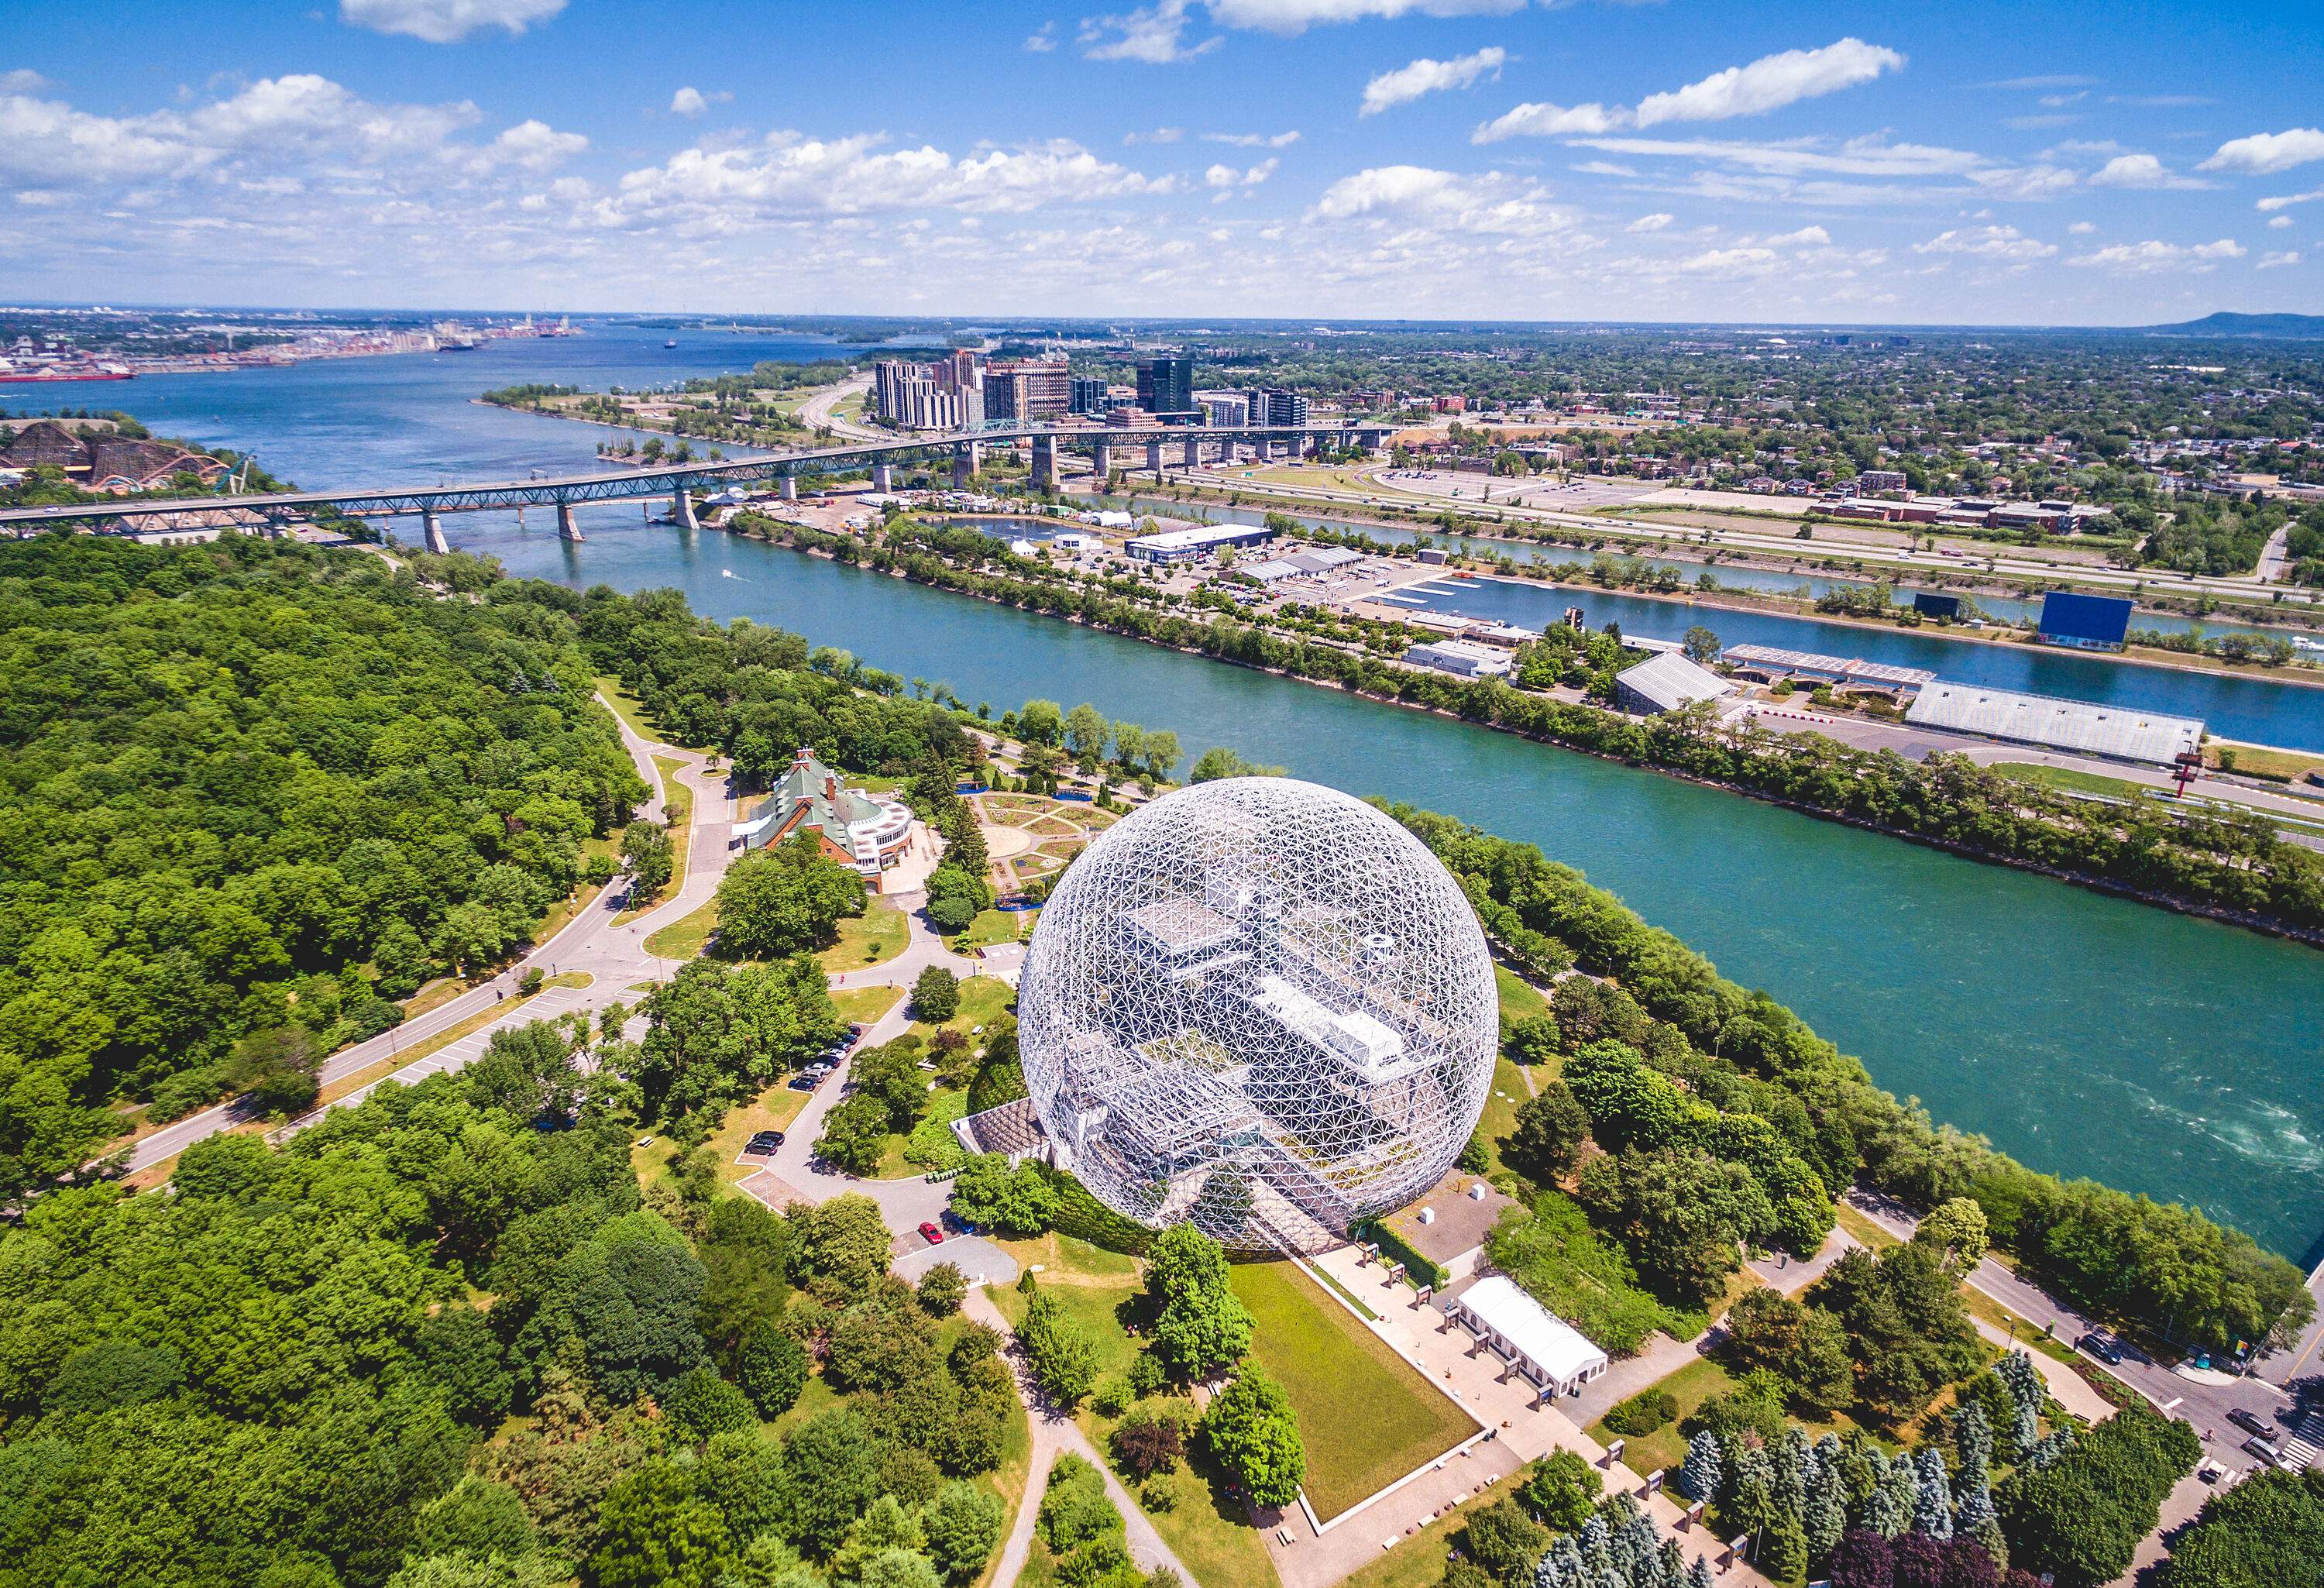 A spectacular geodesic dome museum nestled in a lush green park alongside the river spanned by a long bridge.